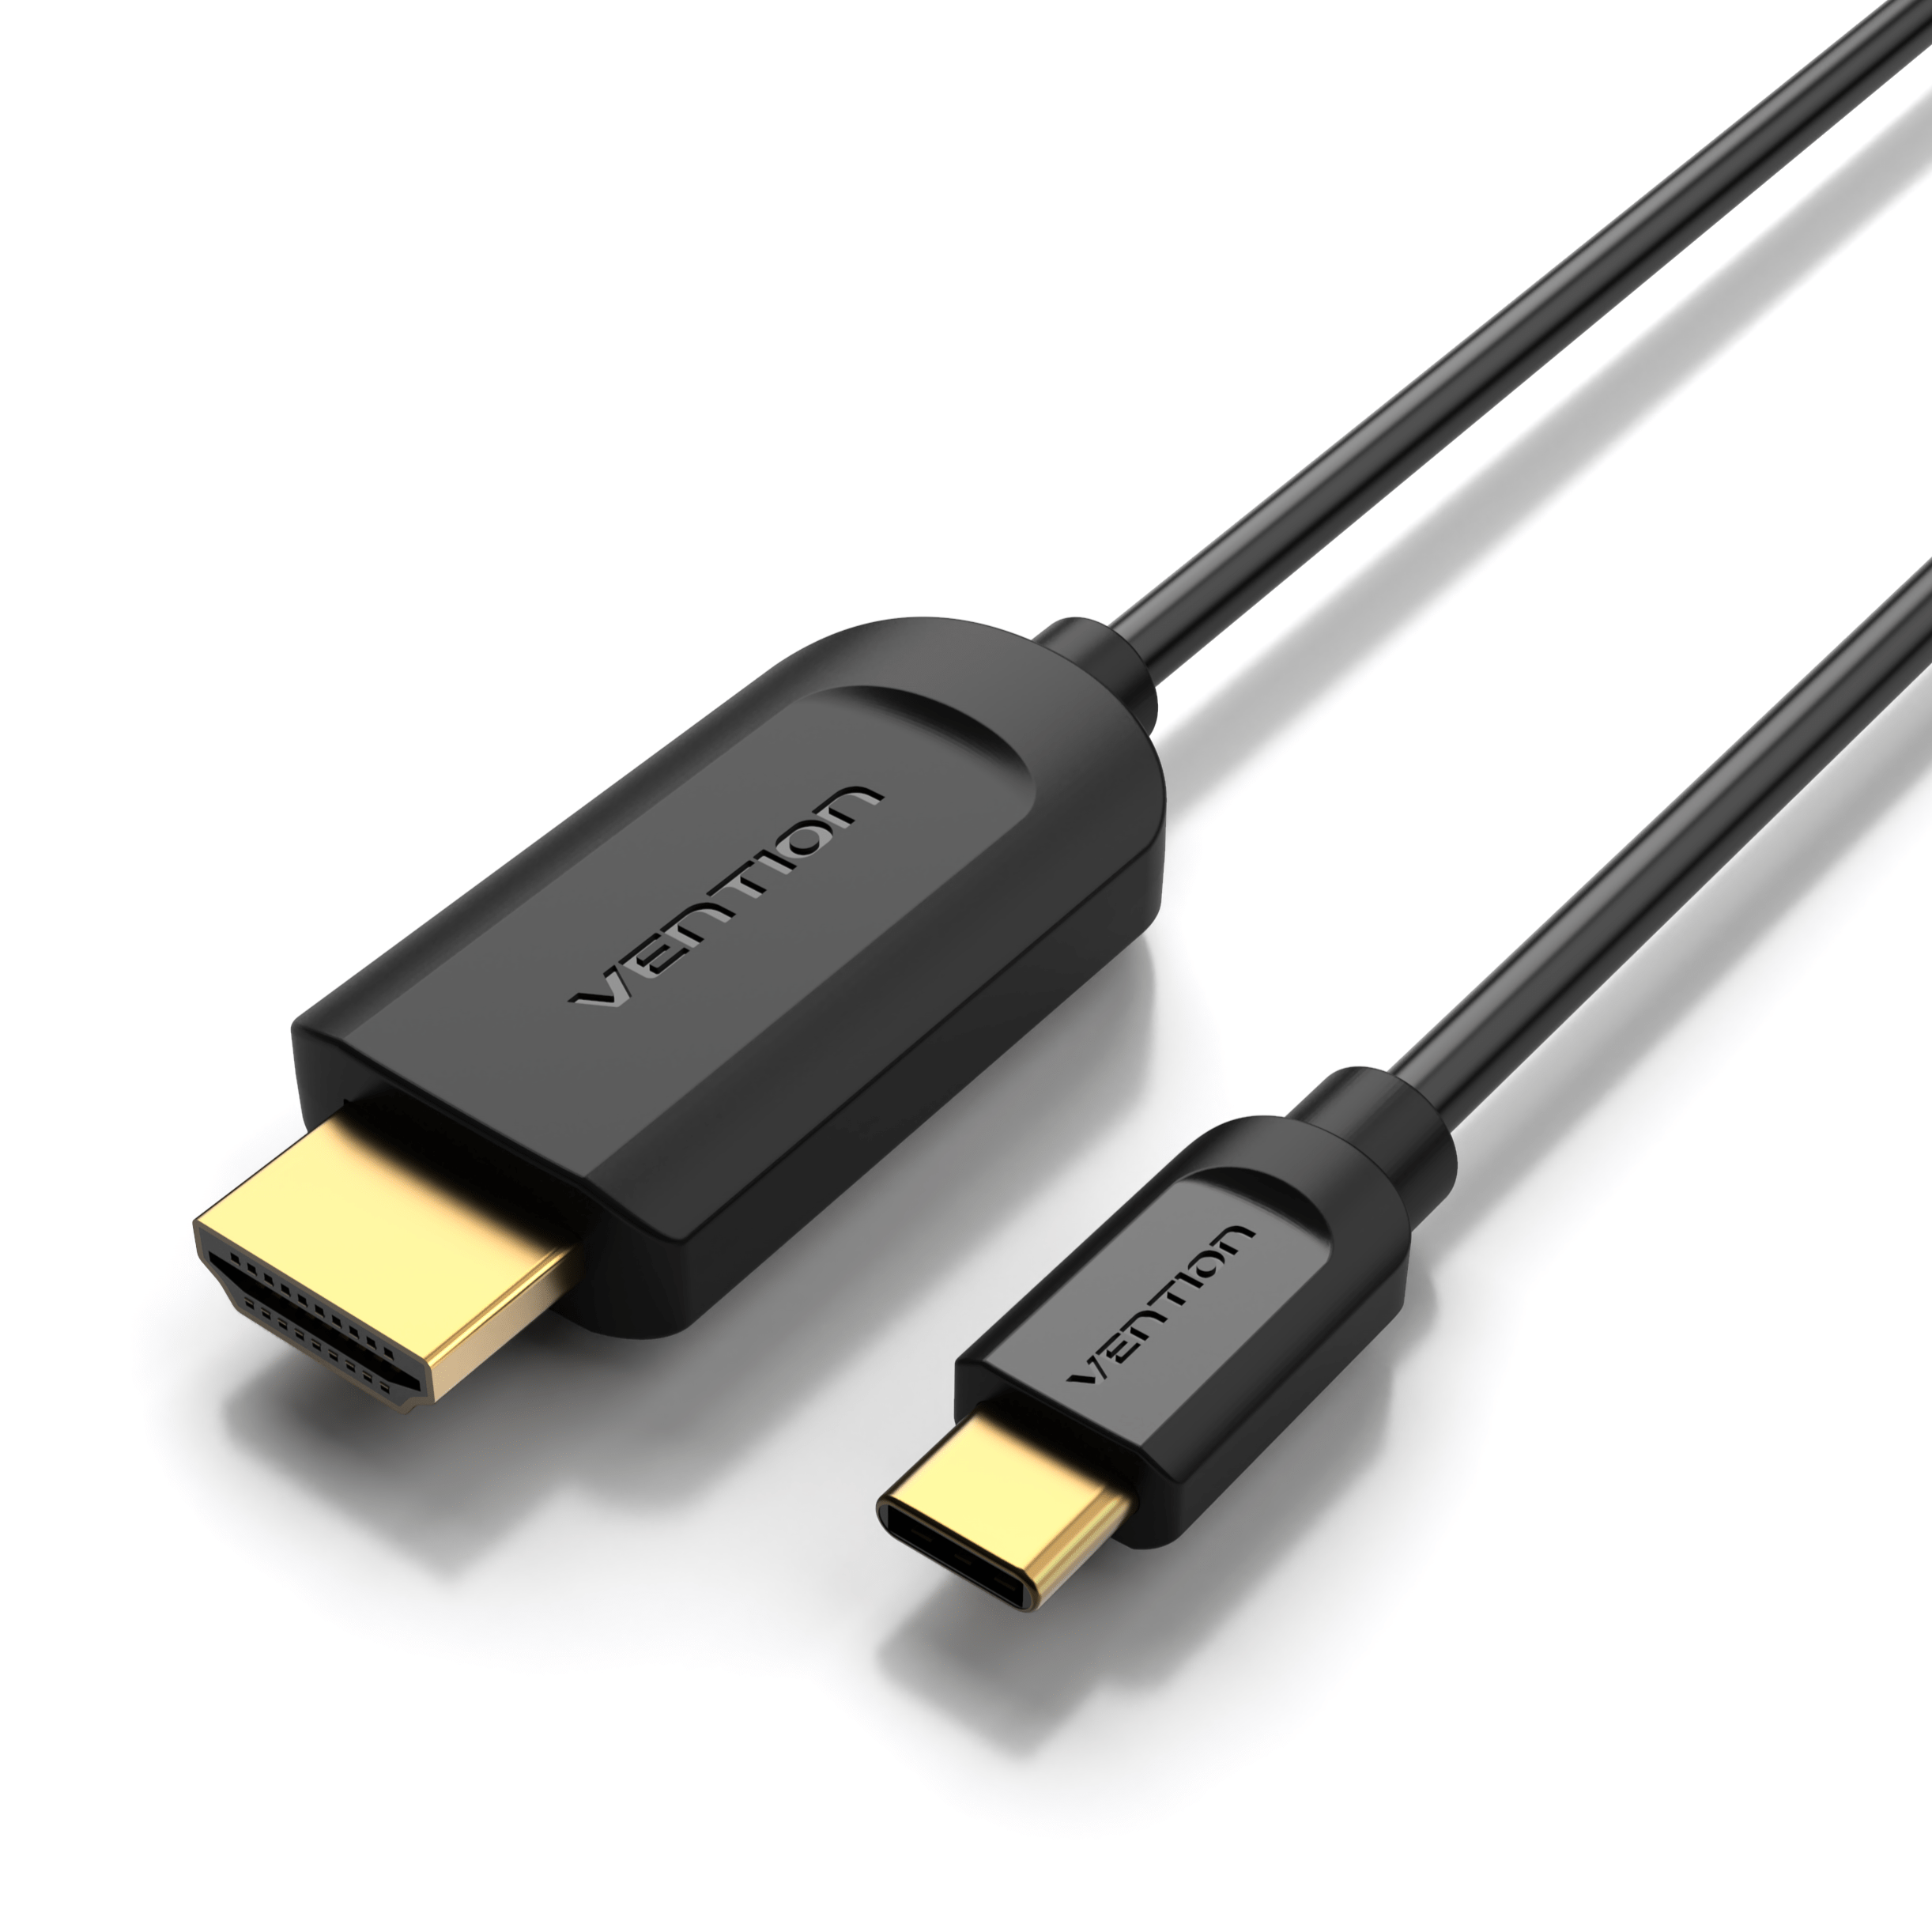 VENTION Type-C to 4K HDMI Cable